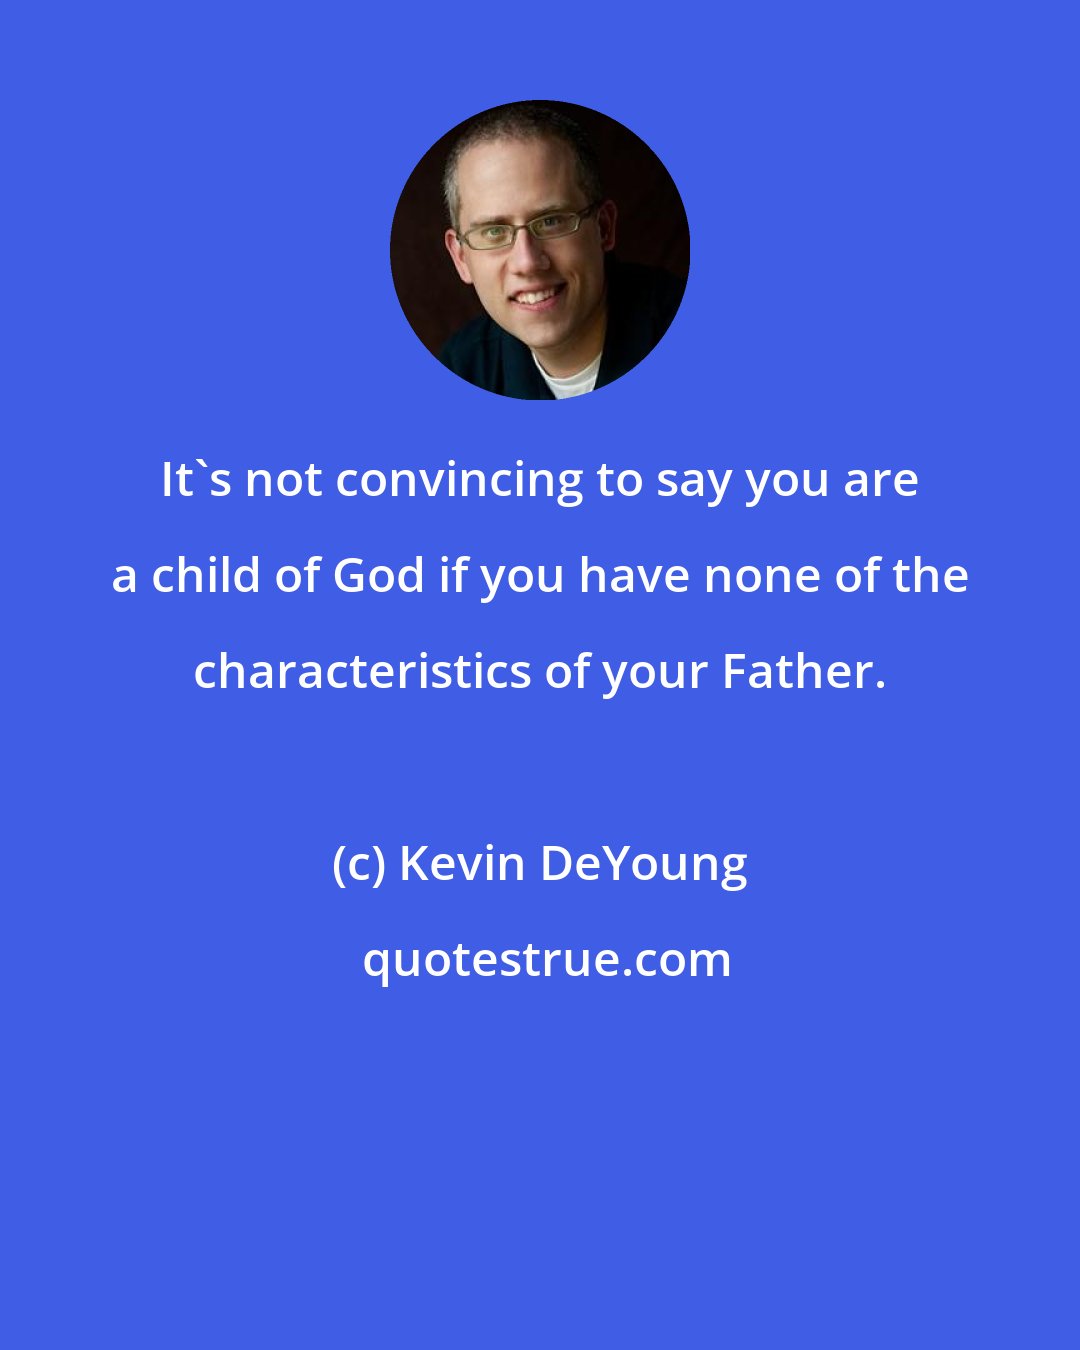 Kevin DeYoung: It's not convincing to say you are a child of God if you have none of the characteristics of your Father.